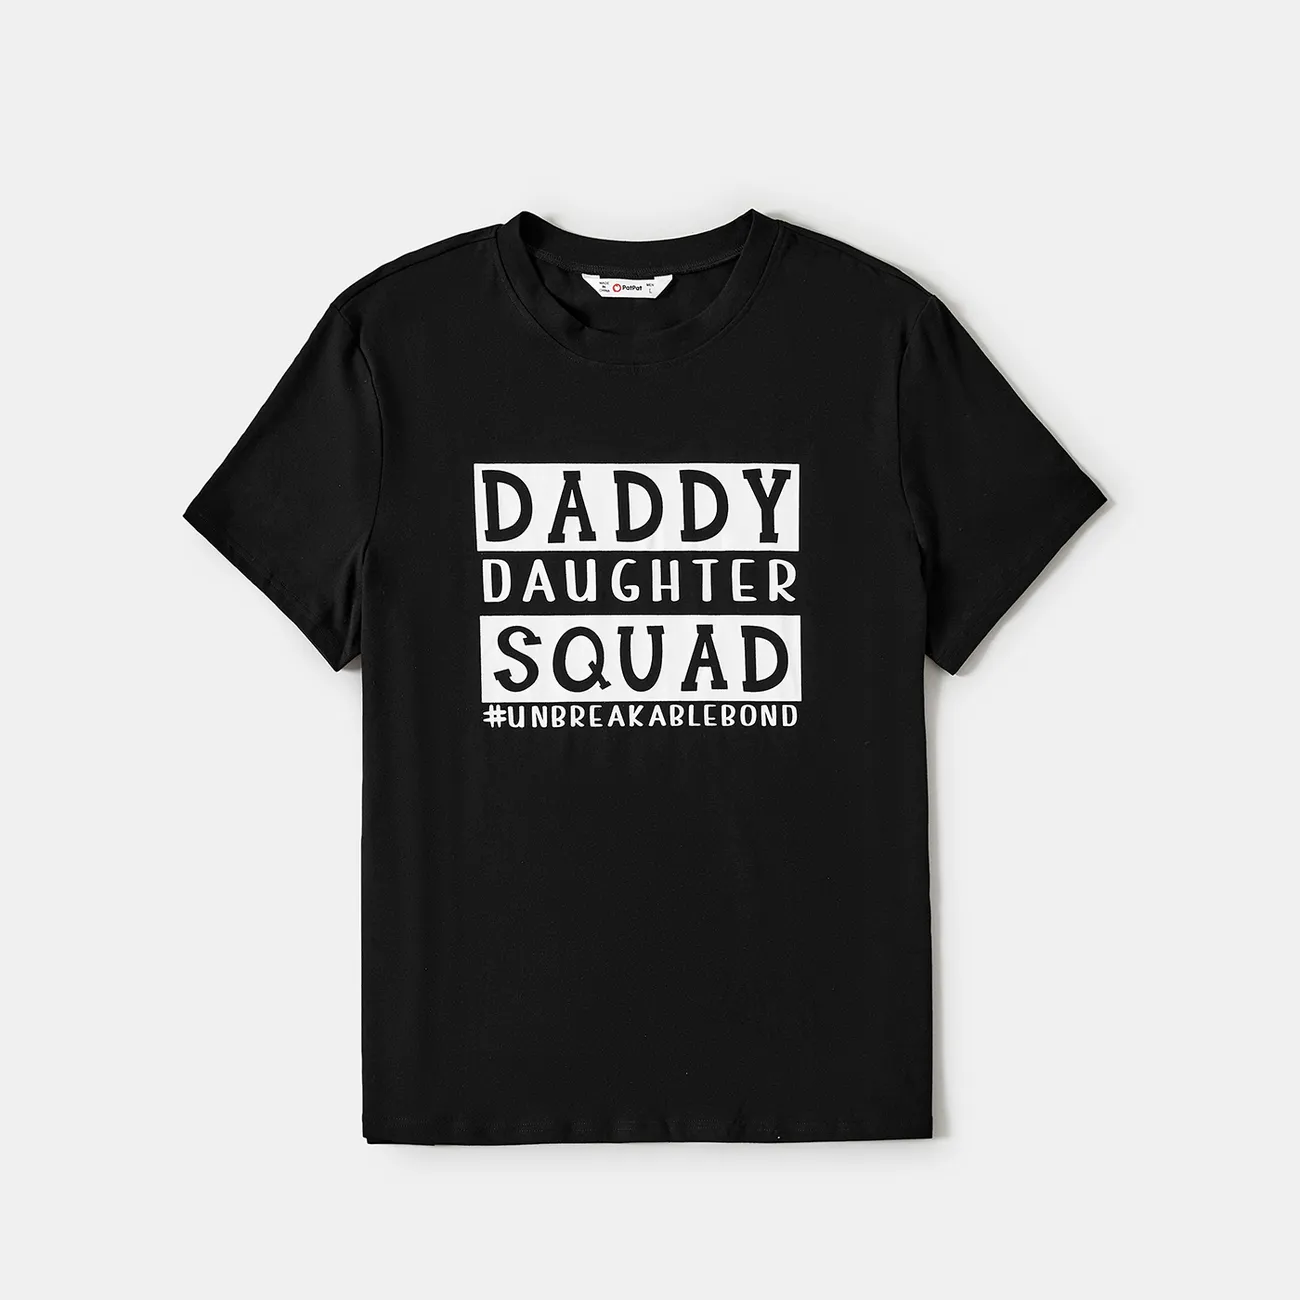 Daddy and Me Letter Print Short-sleeve Cotton Tee Black big image 1